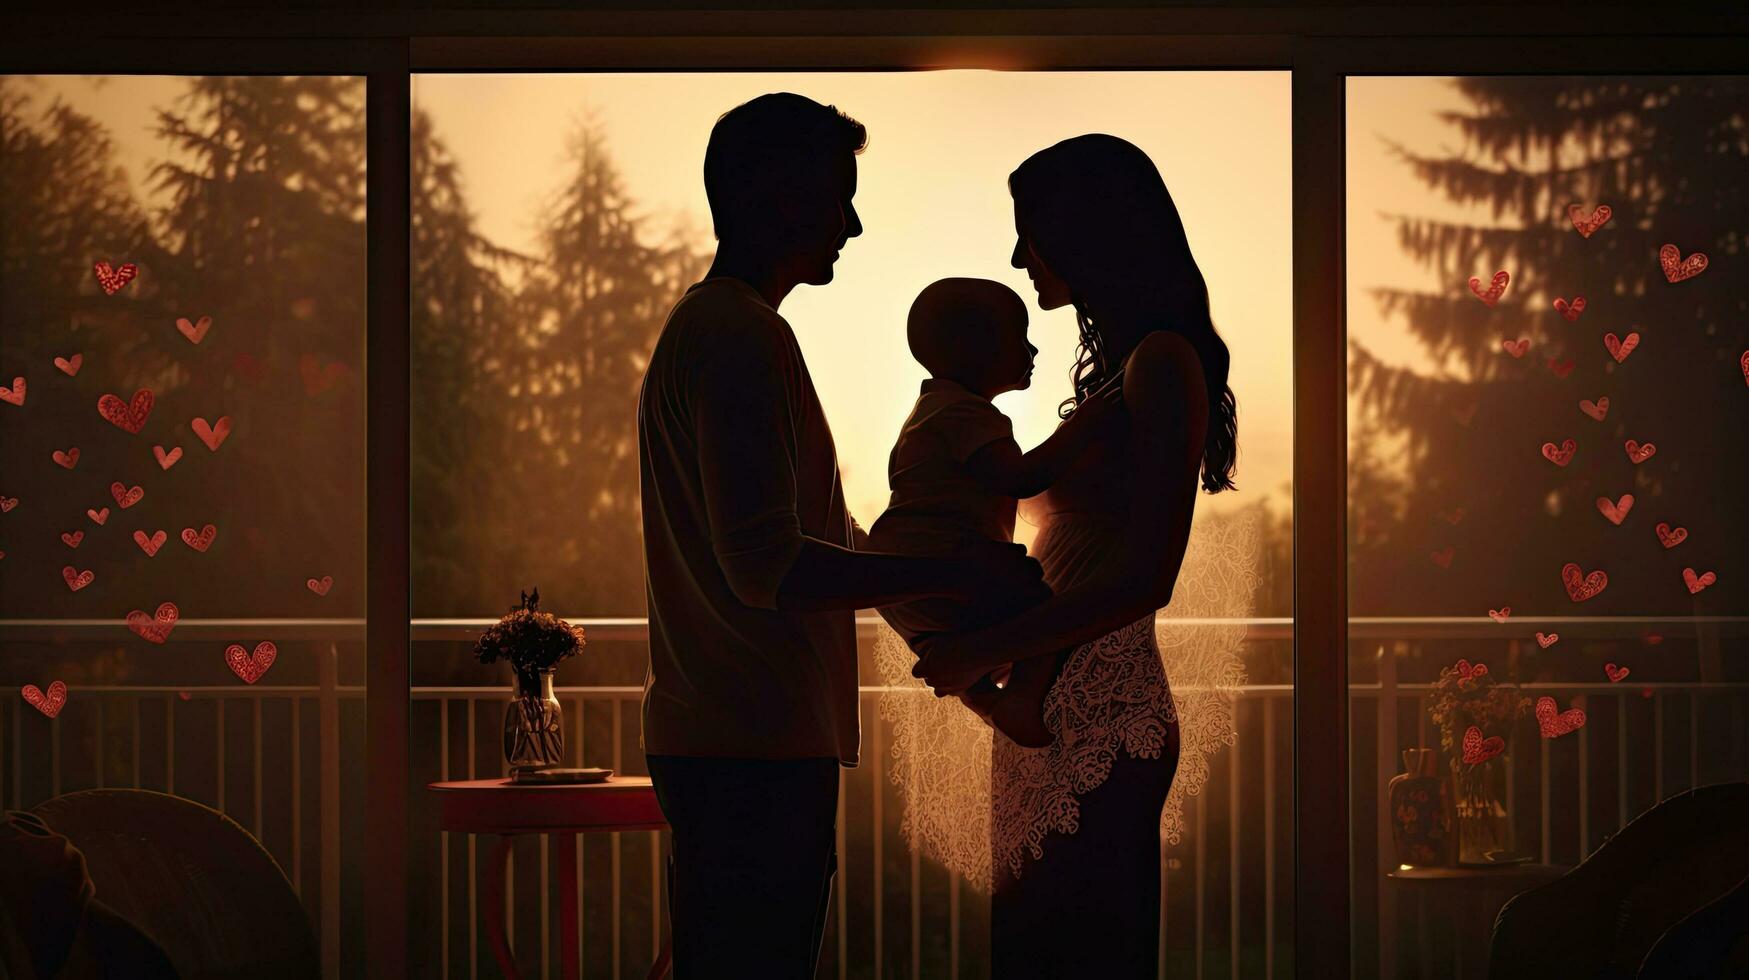 Happy parents holding newborn baby by window heart shaped silhouettes photo